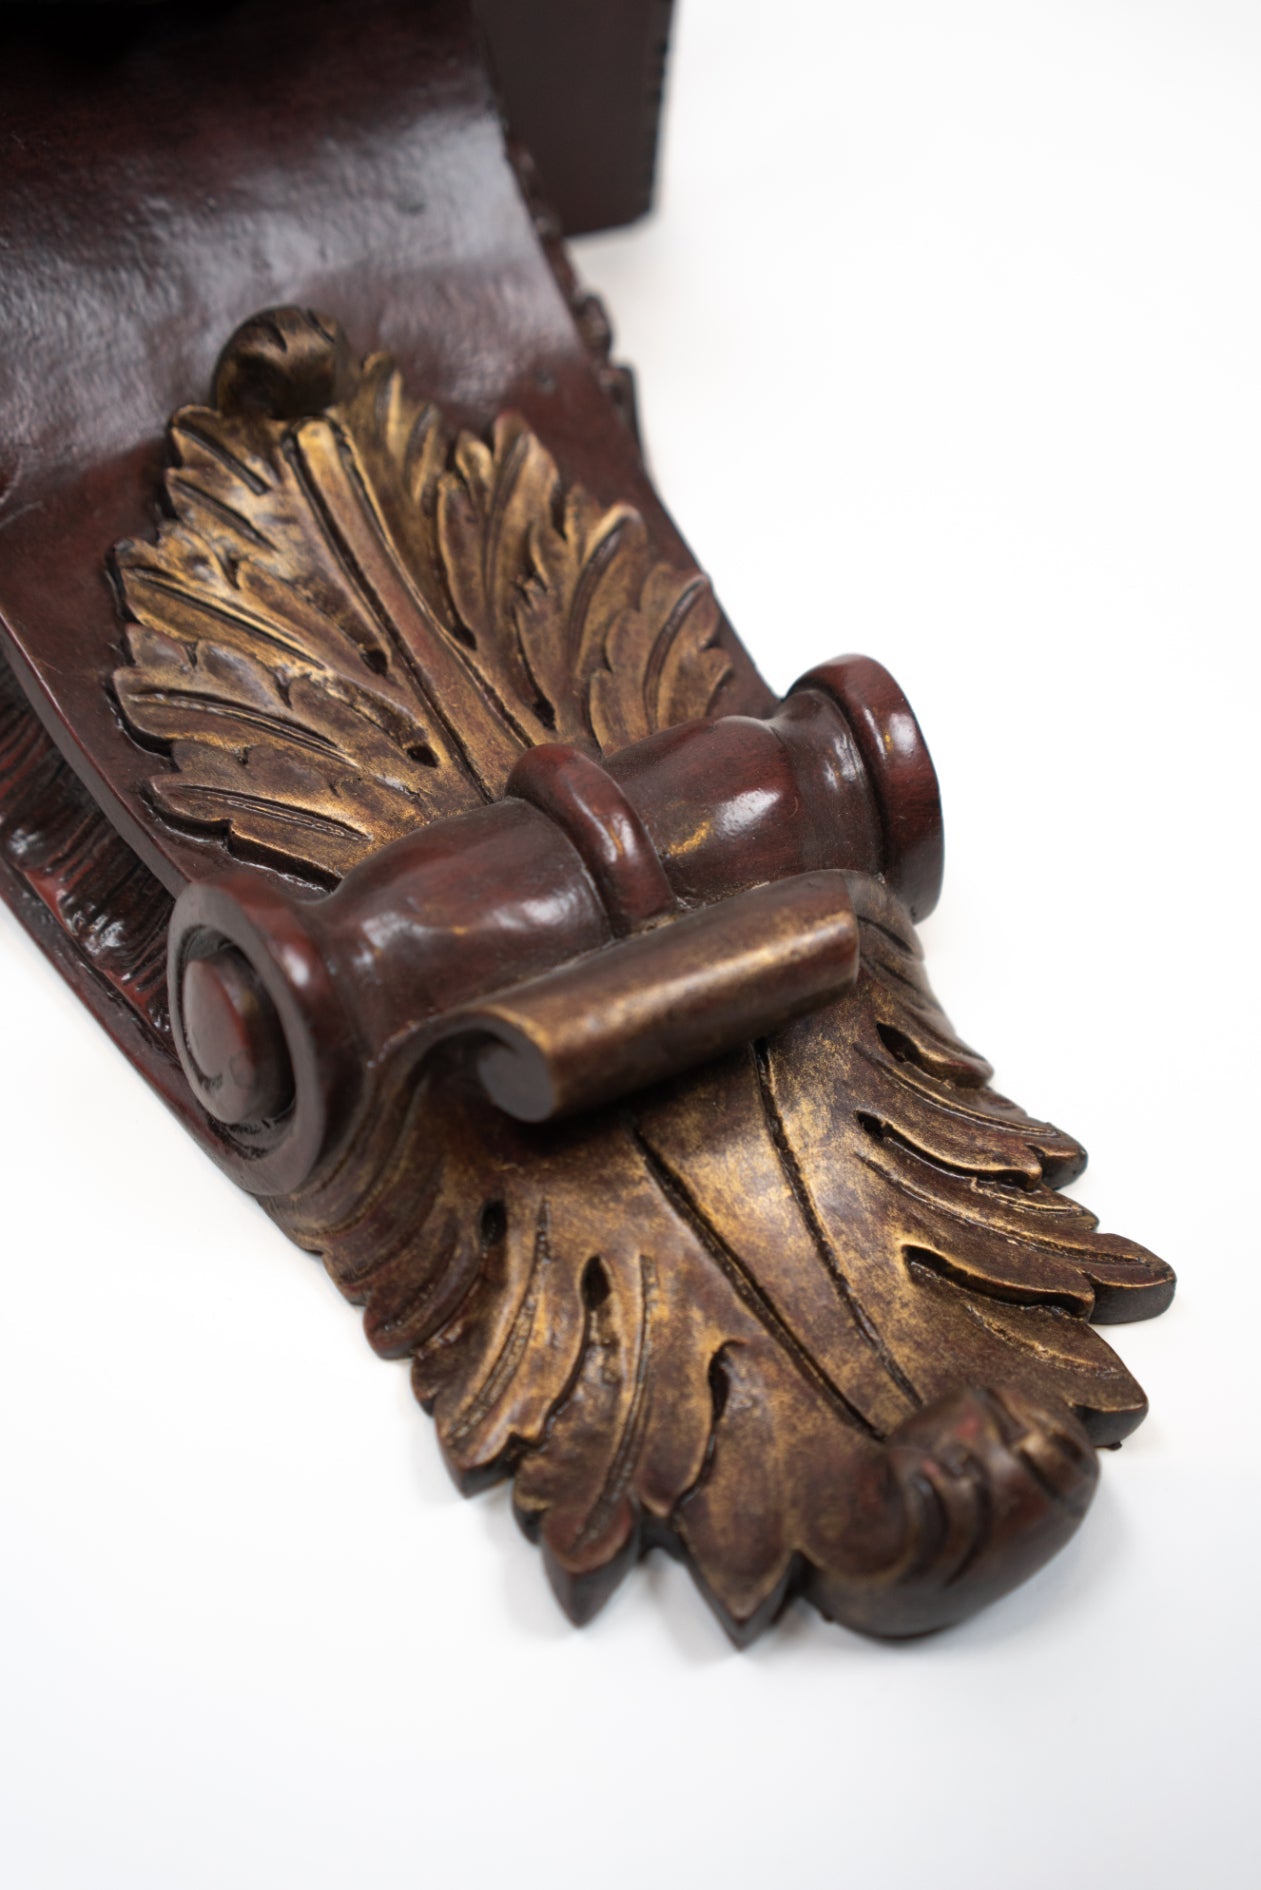 Carved Wood Wall Bracket - Sirdab - Unknown